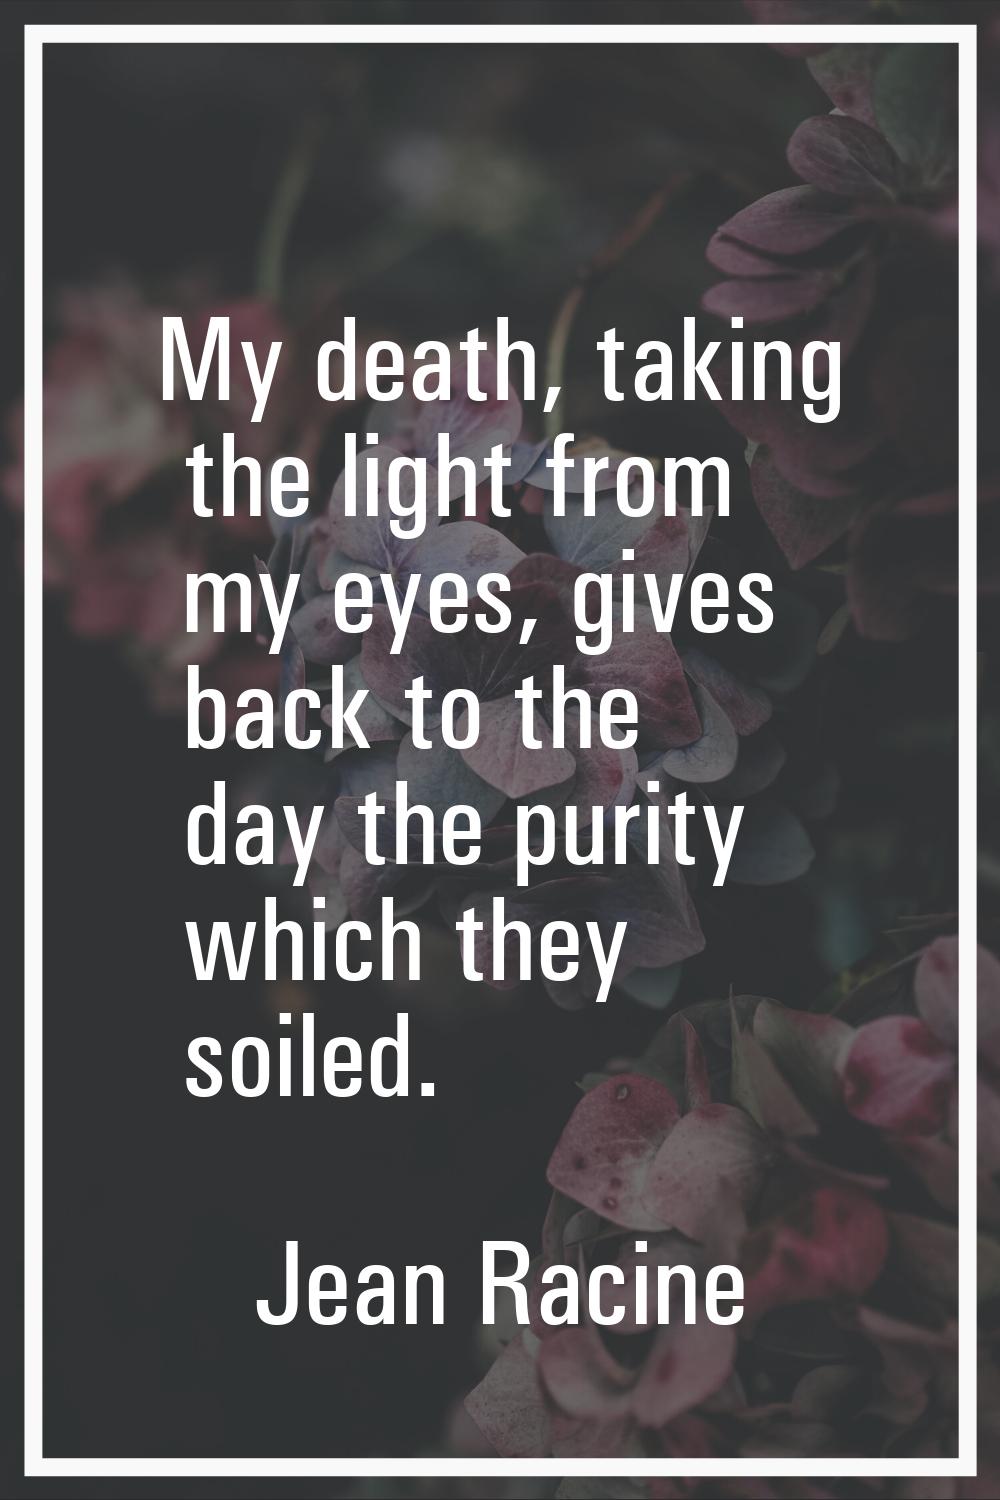 My death, taking the light from my eyes, gives back to the day the purity which they soiled.